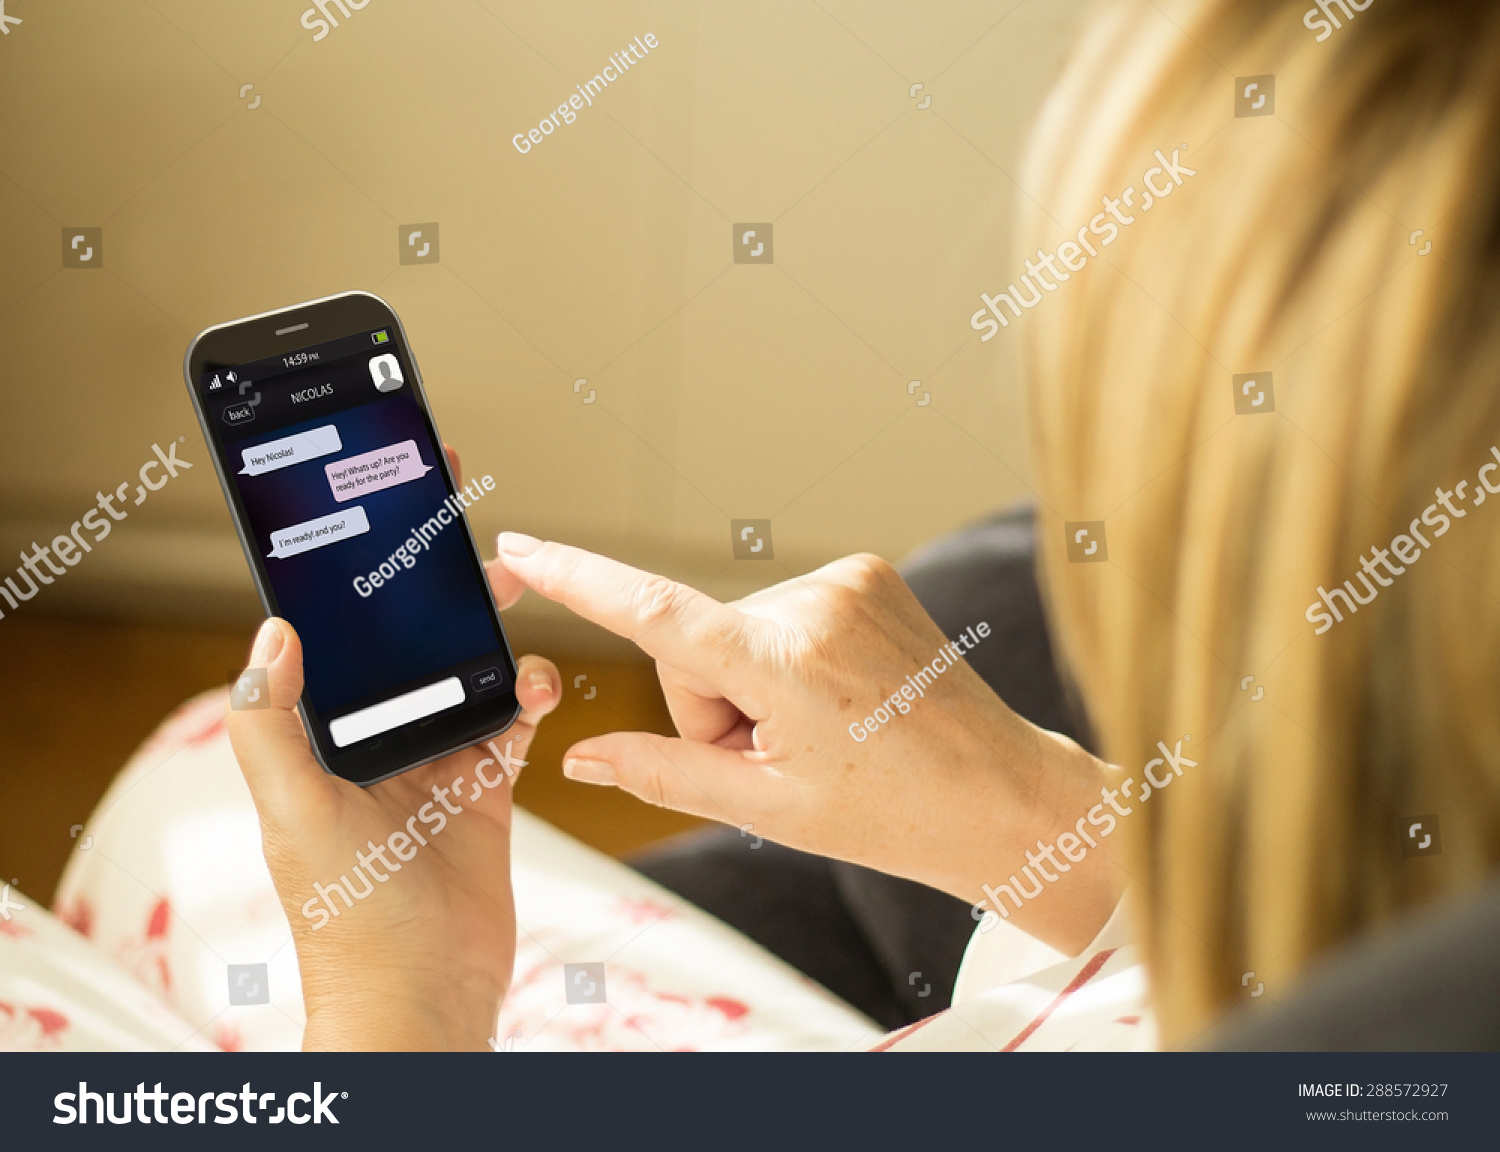 wireless communications and social concept: woman with a 3d generated smartphone with instant messaging on the screen. All screen graphics made up. #288572927